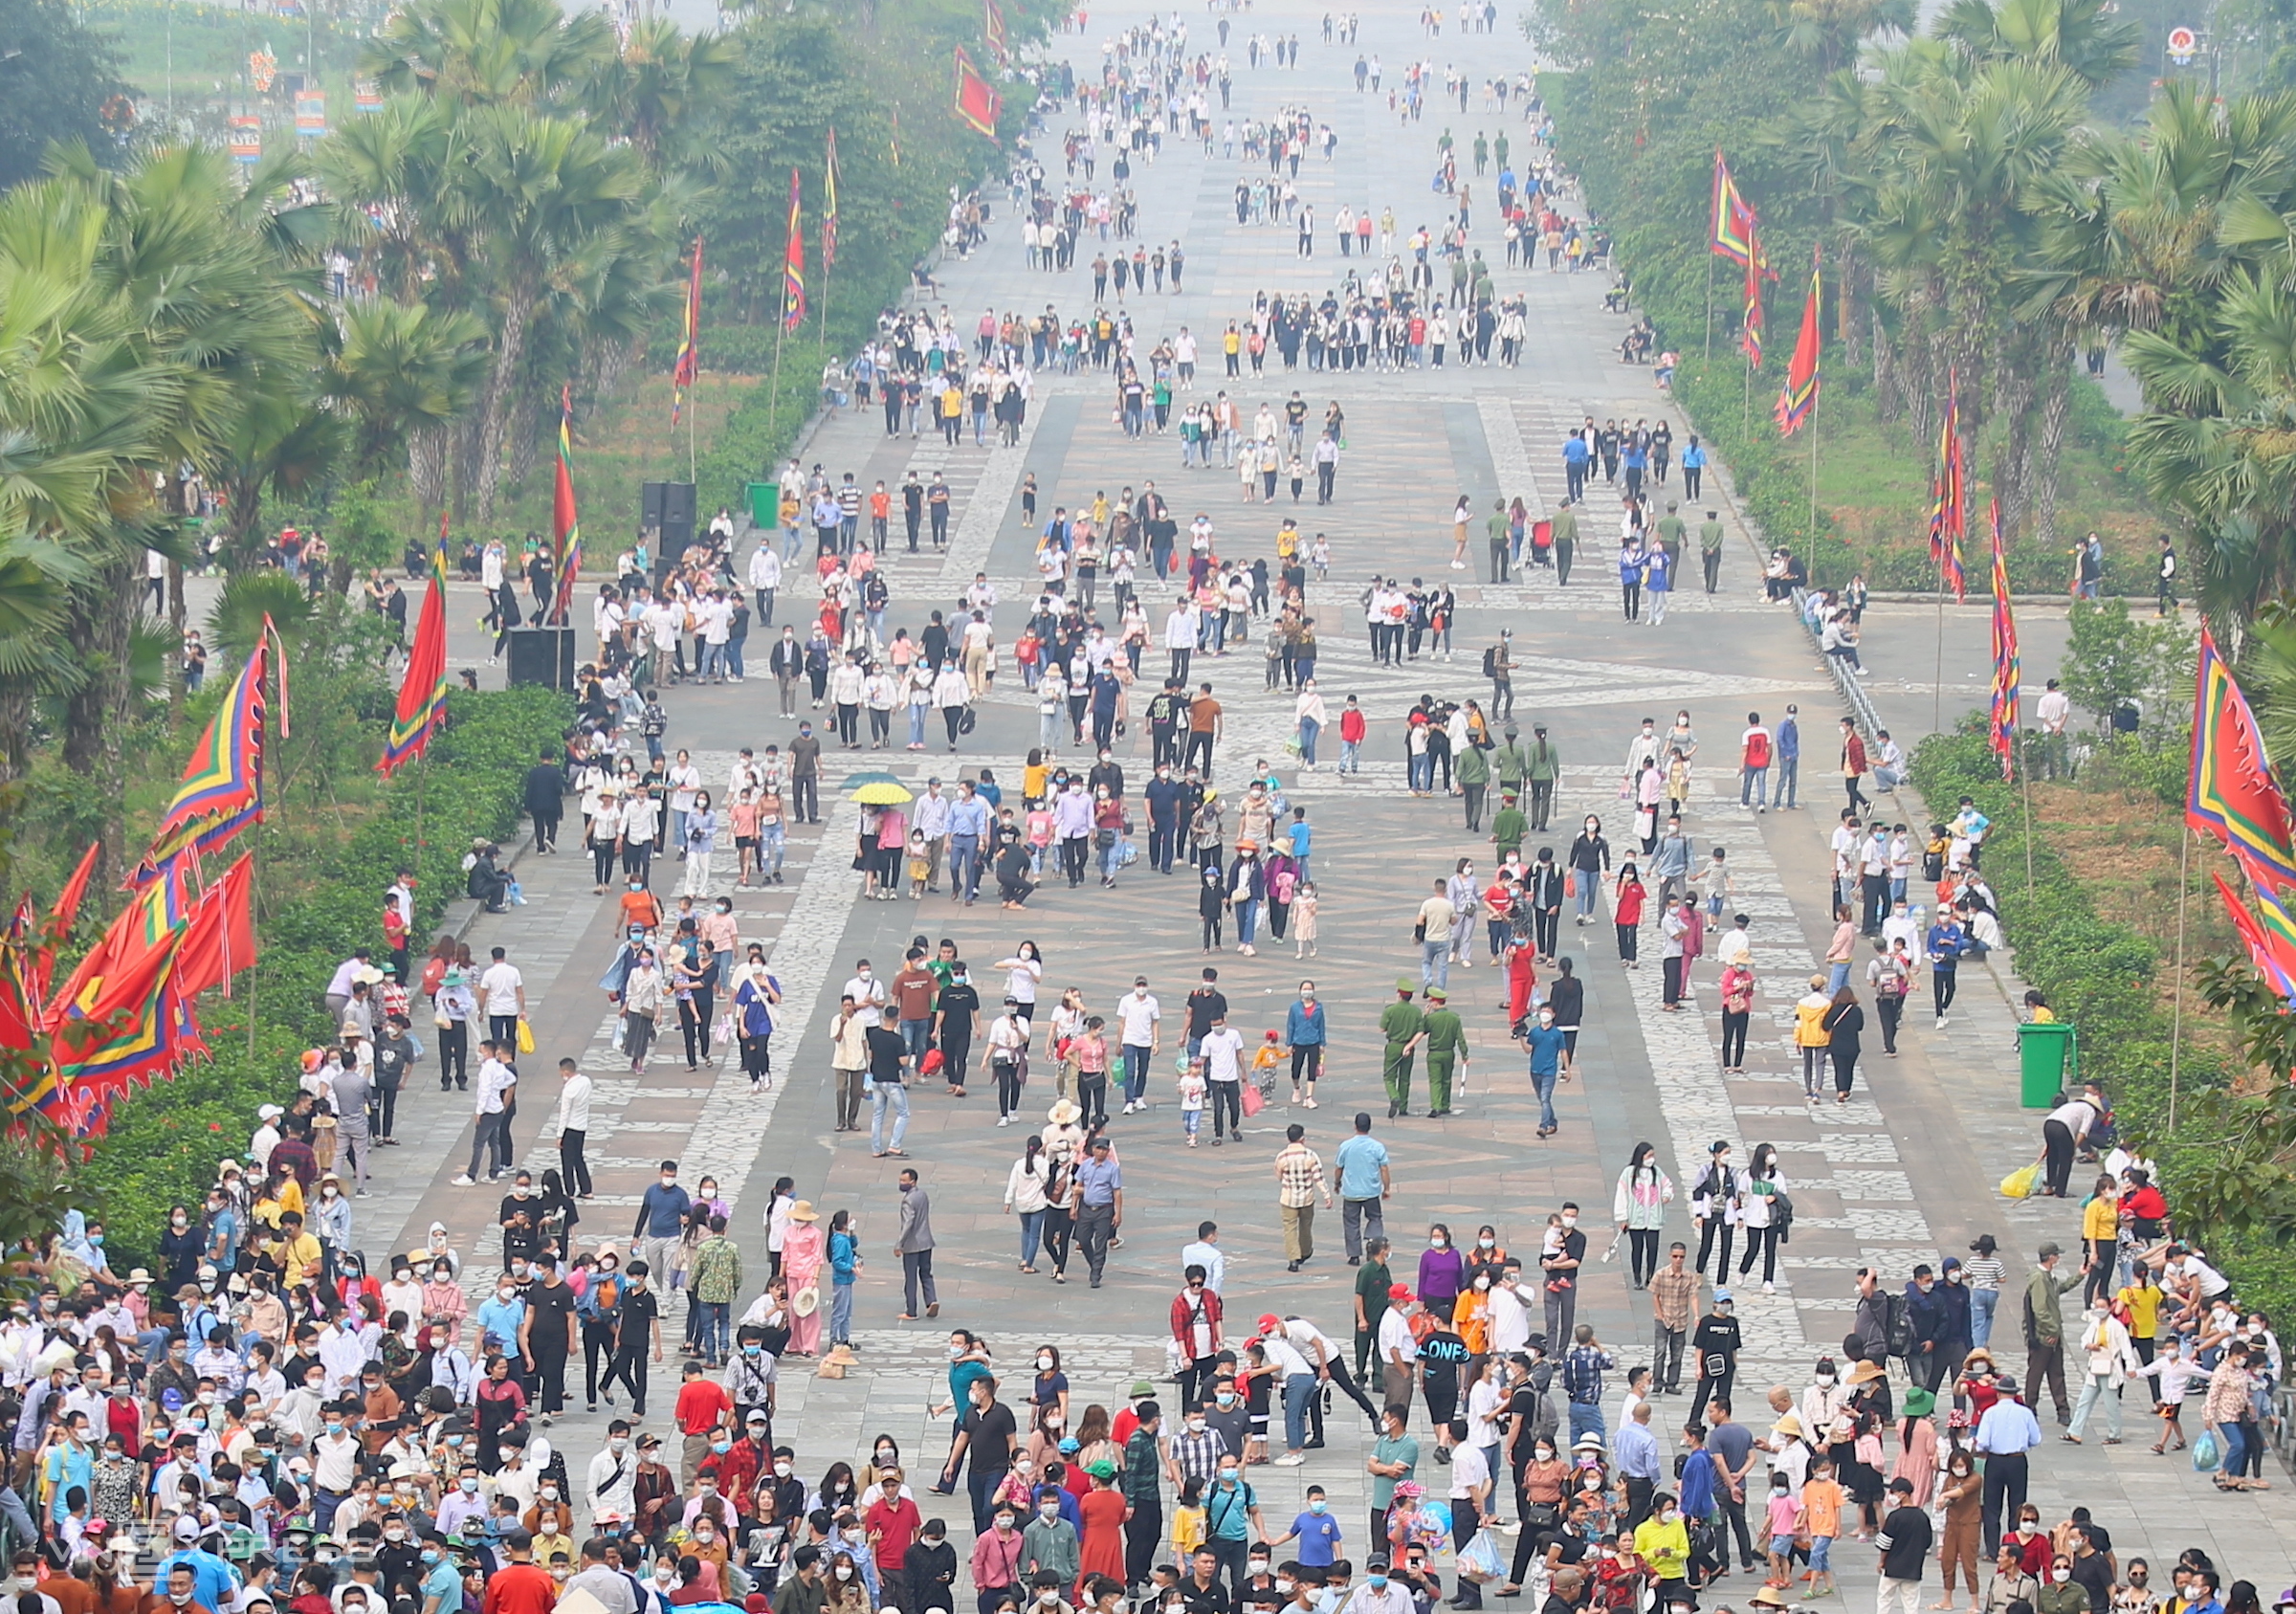 Groups of pilgrims outside the temple Sunday morning. After a three-year hiatus due to the Covid-19 pandemic, Phu Tho authorities resumed ceremonial activities for the festival this year, instead of organizing basic rituals without crowds as they did in 2019, 2020 and 2021.   This year, the festival will include many attractions including water puppet shows, exhibitions and firework displays.